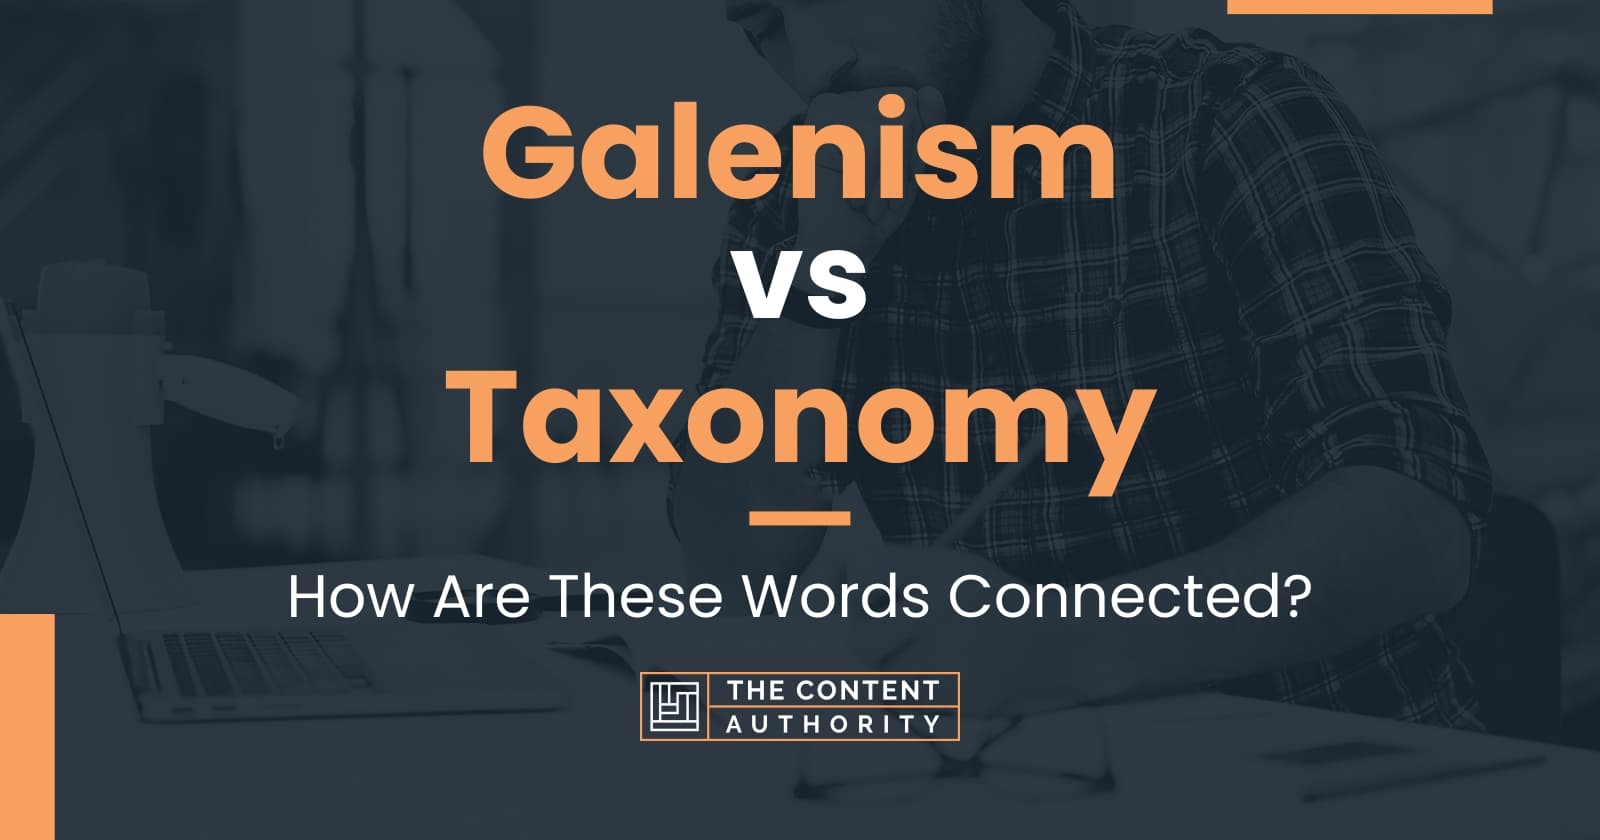 Galenism vs Taxonomy: How Are These Words Connected?